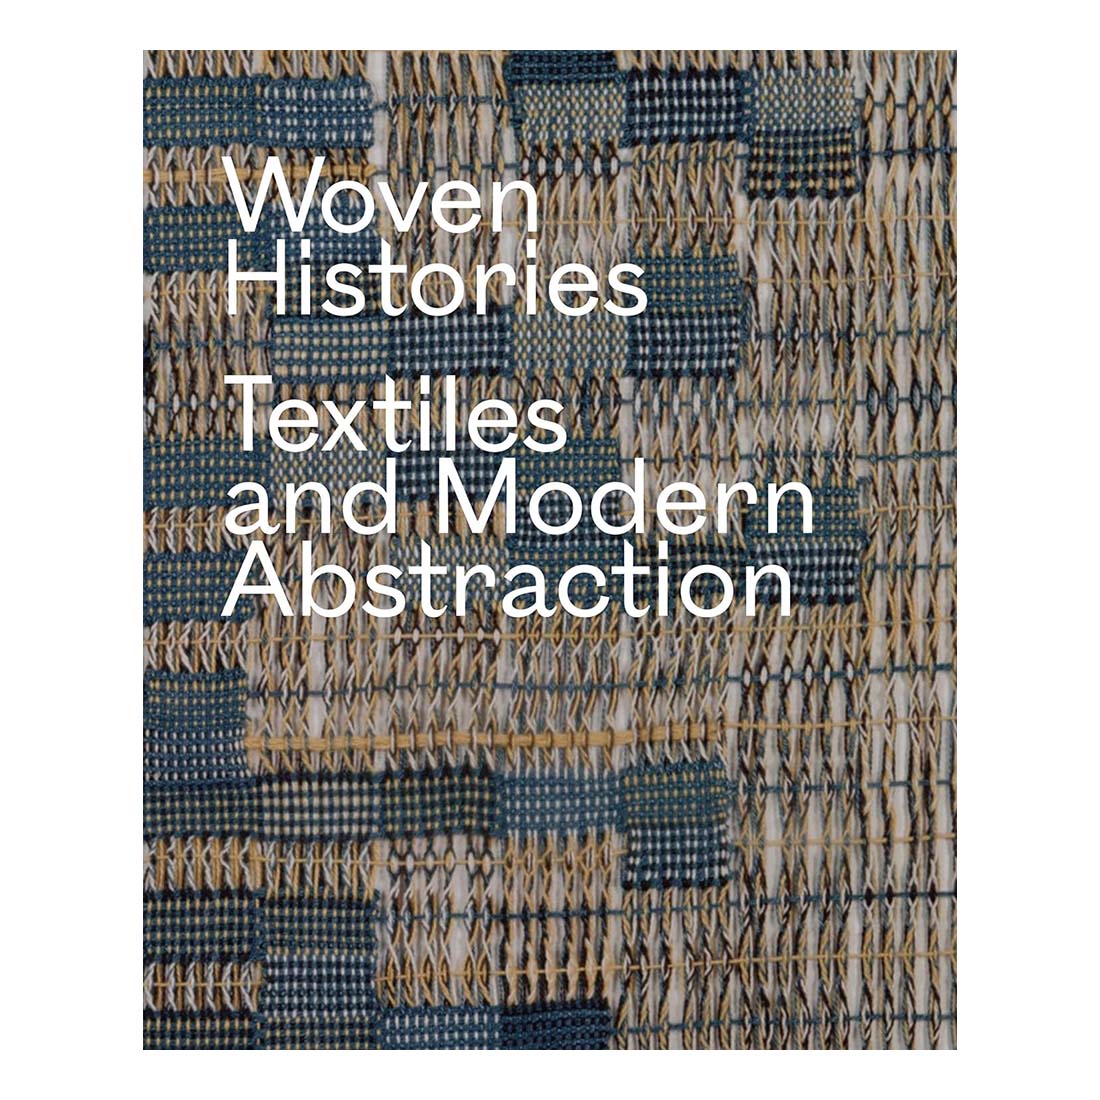 Woven Histories: Textiles and Modern Abstractions